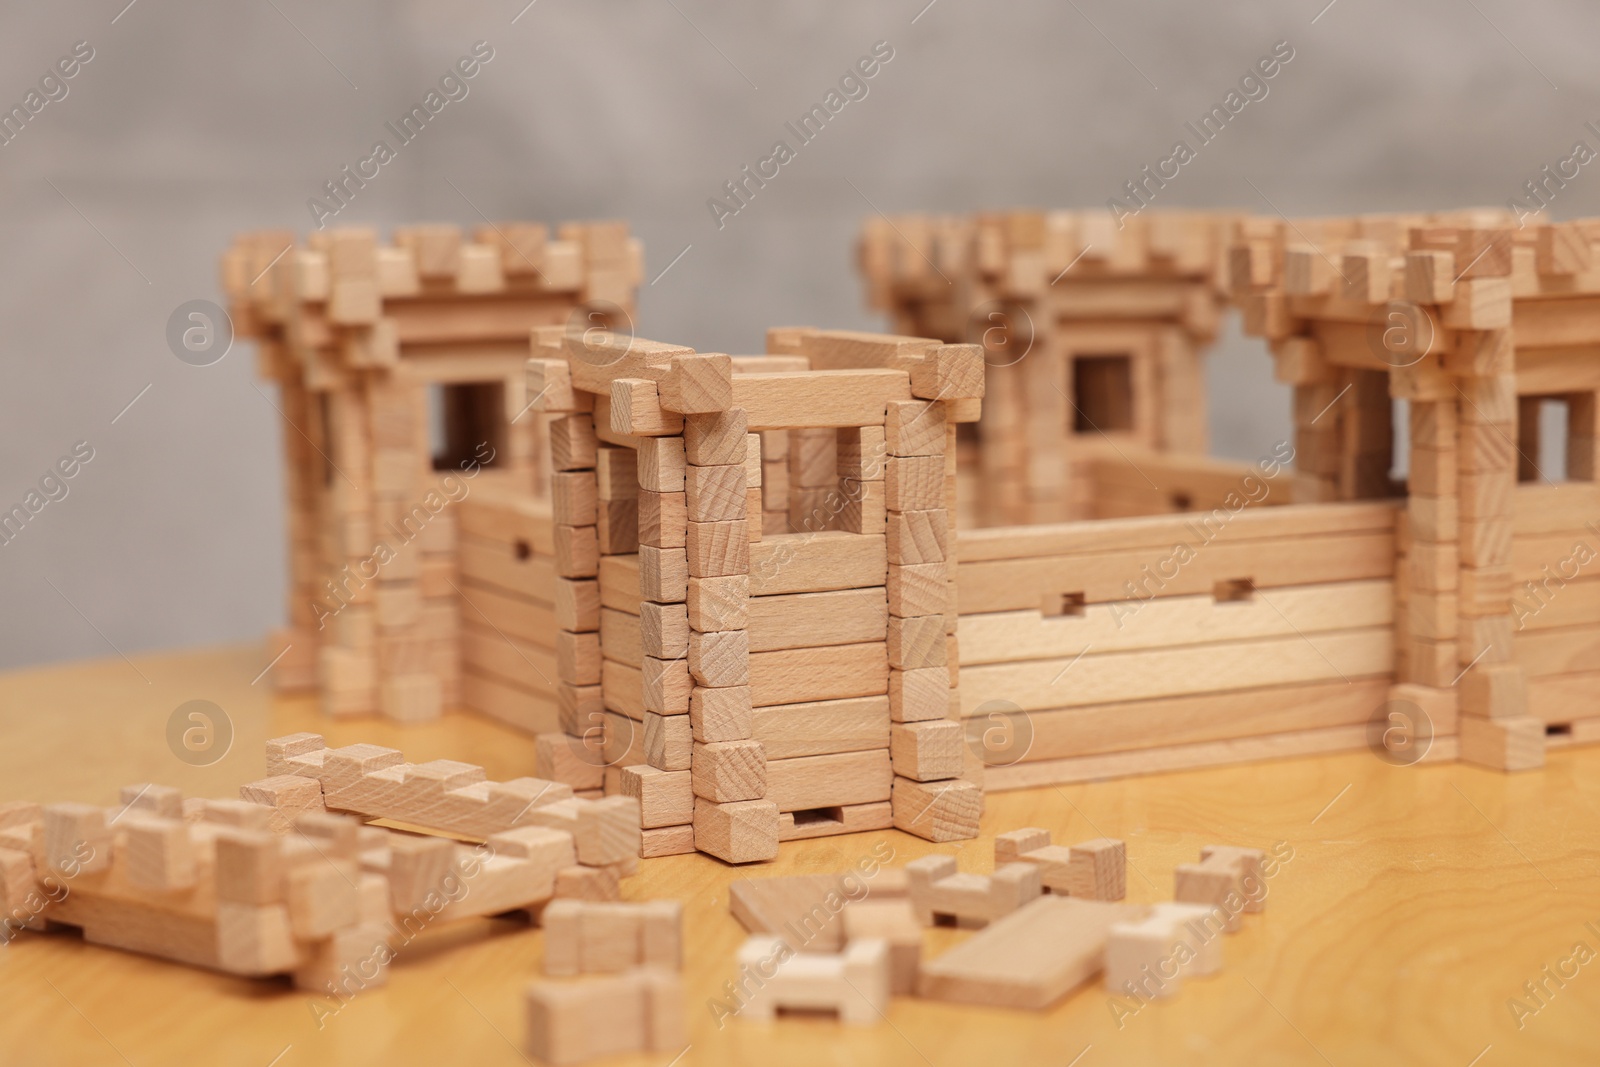 Photo of Wooden fortress and building blocks on table against grey background, closeup. Children's toy